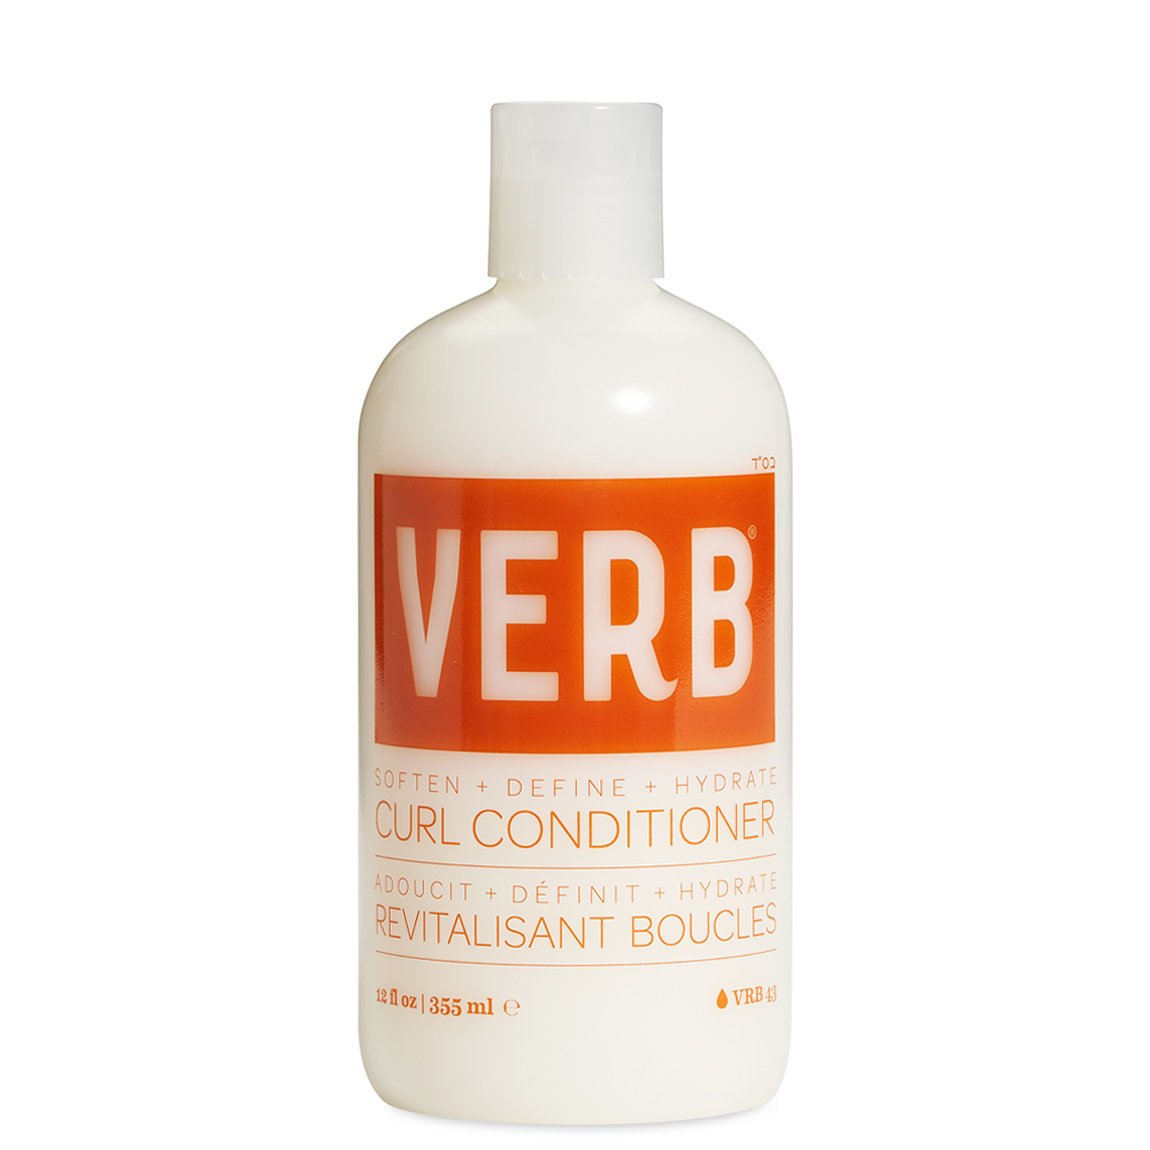 Verb Curl Conditioner 12 fl oz  alternative view 1 - product swatch.